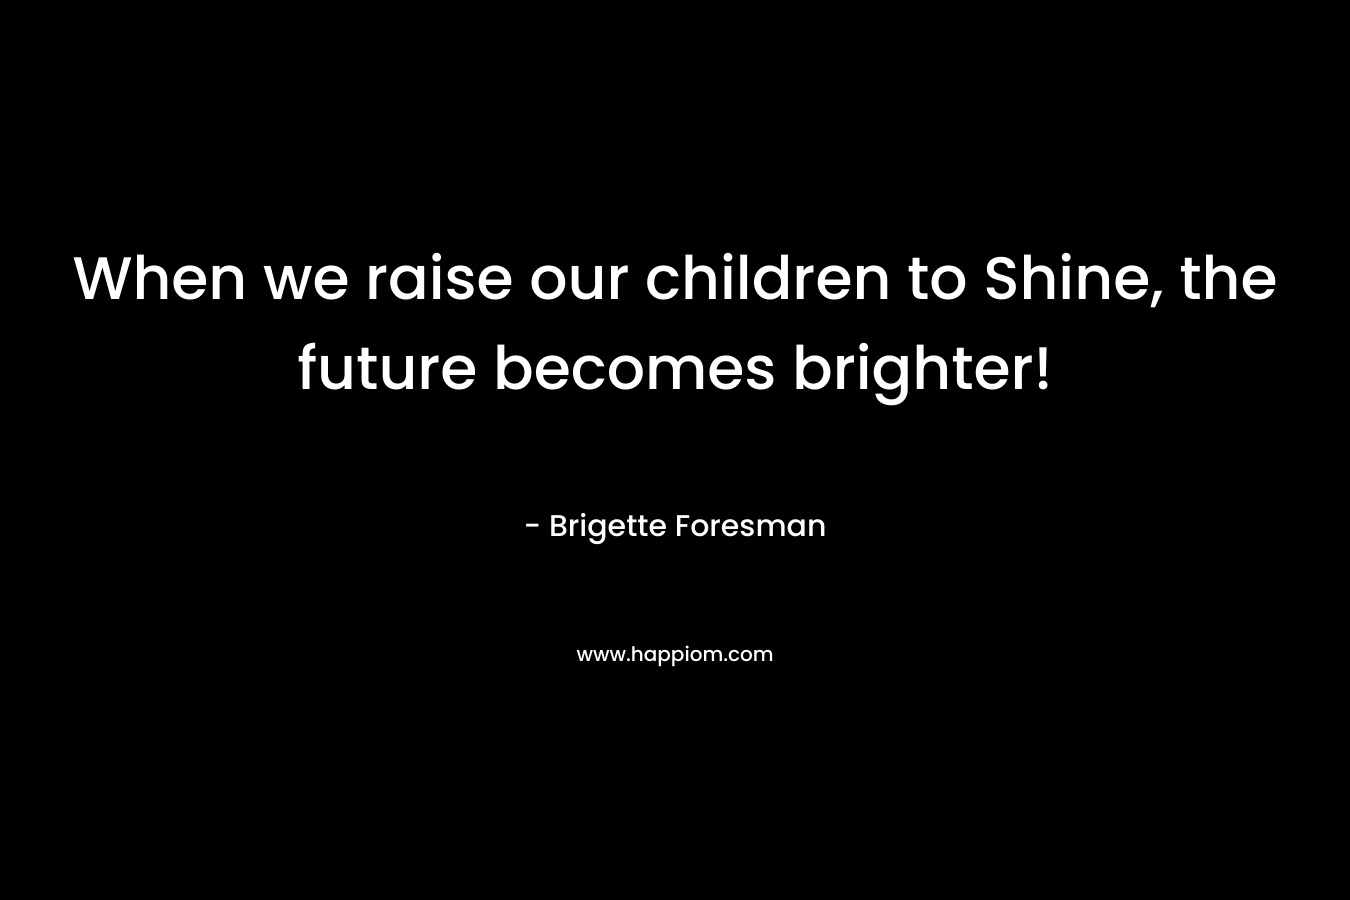 When we raise our children to Shine, the future becomes brighter!